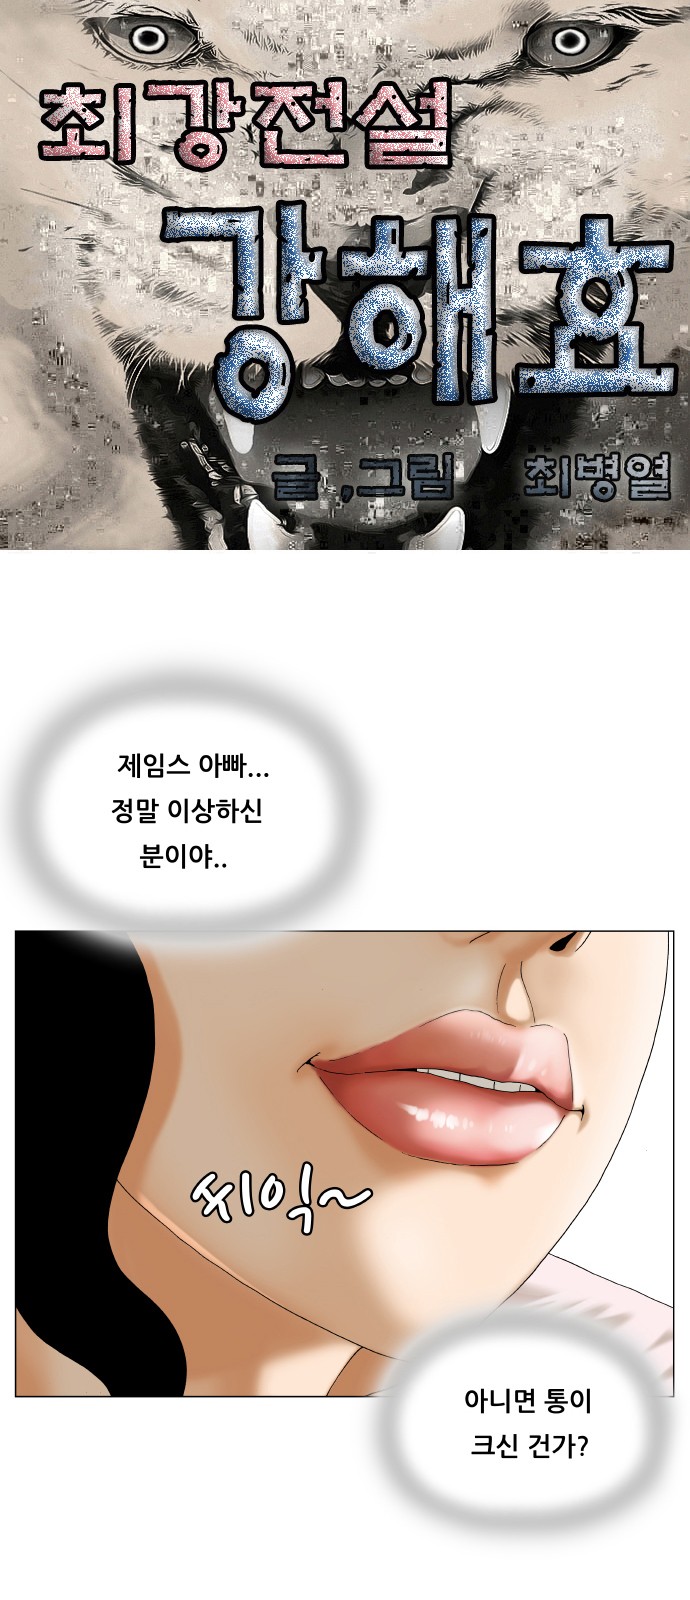 Ultimate Legend - Kang Hae Hyo - Chapter 463 - Page 1